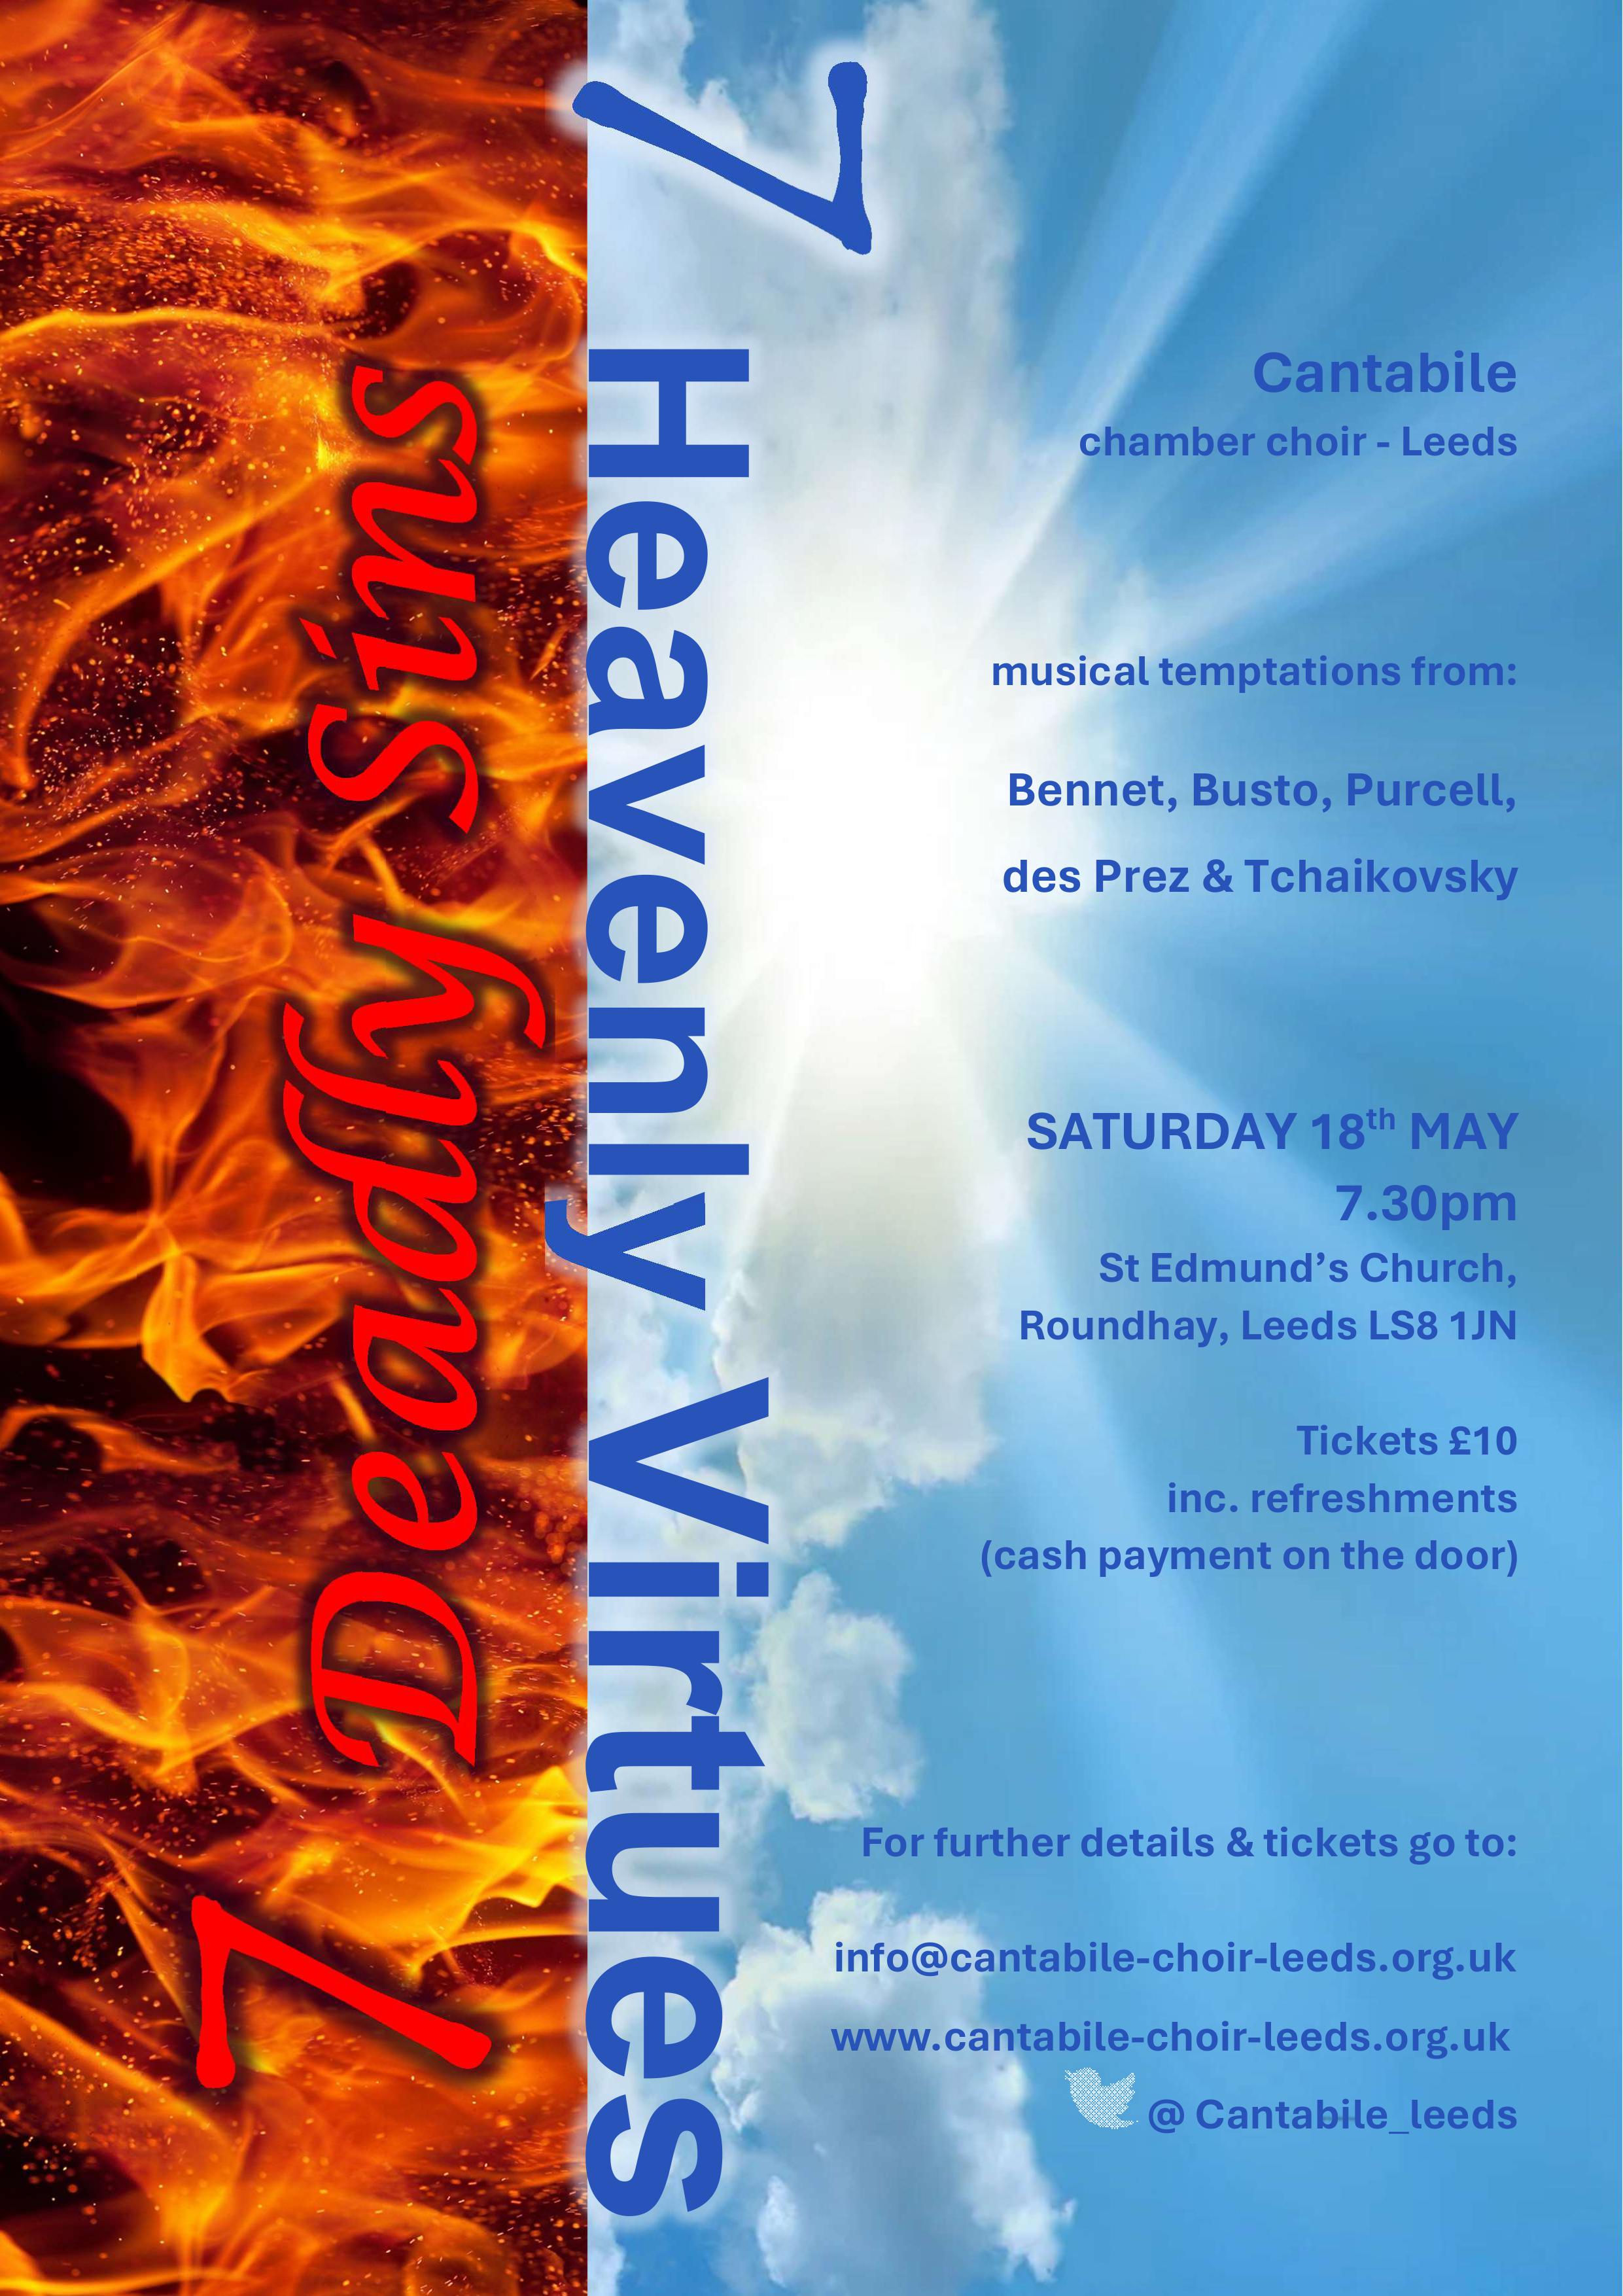 Seven deadly sins, Seven deadly virtues. a vertical background of
red fire and a vertical background of blue sky separate the sins and
virtues. Evening concert flyer May 2024, all details in text above.